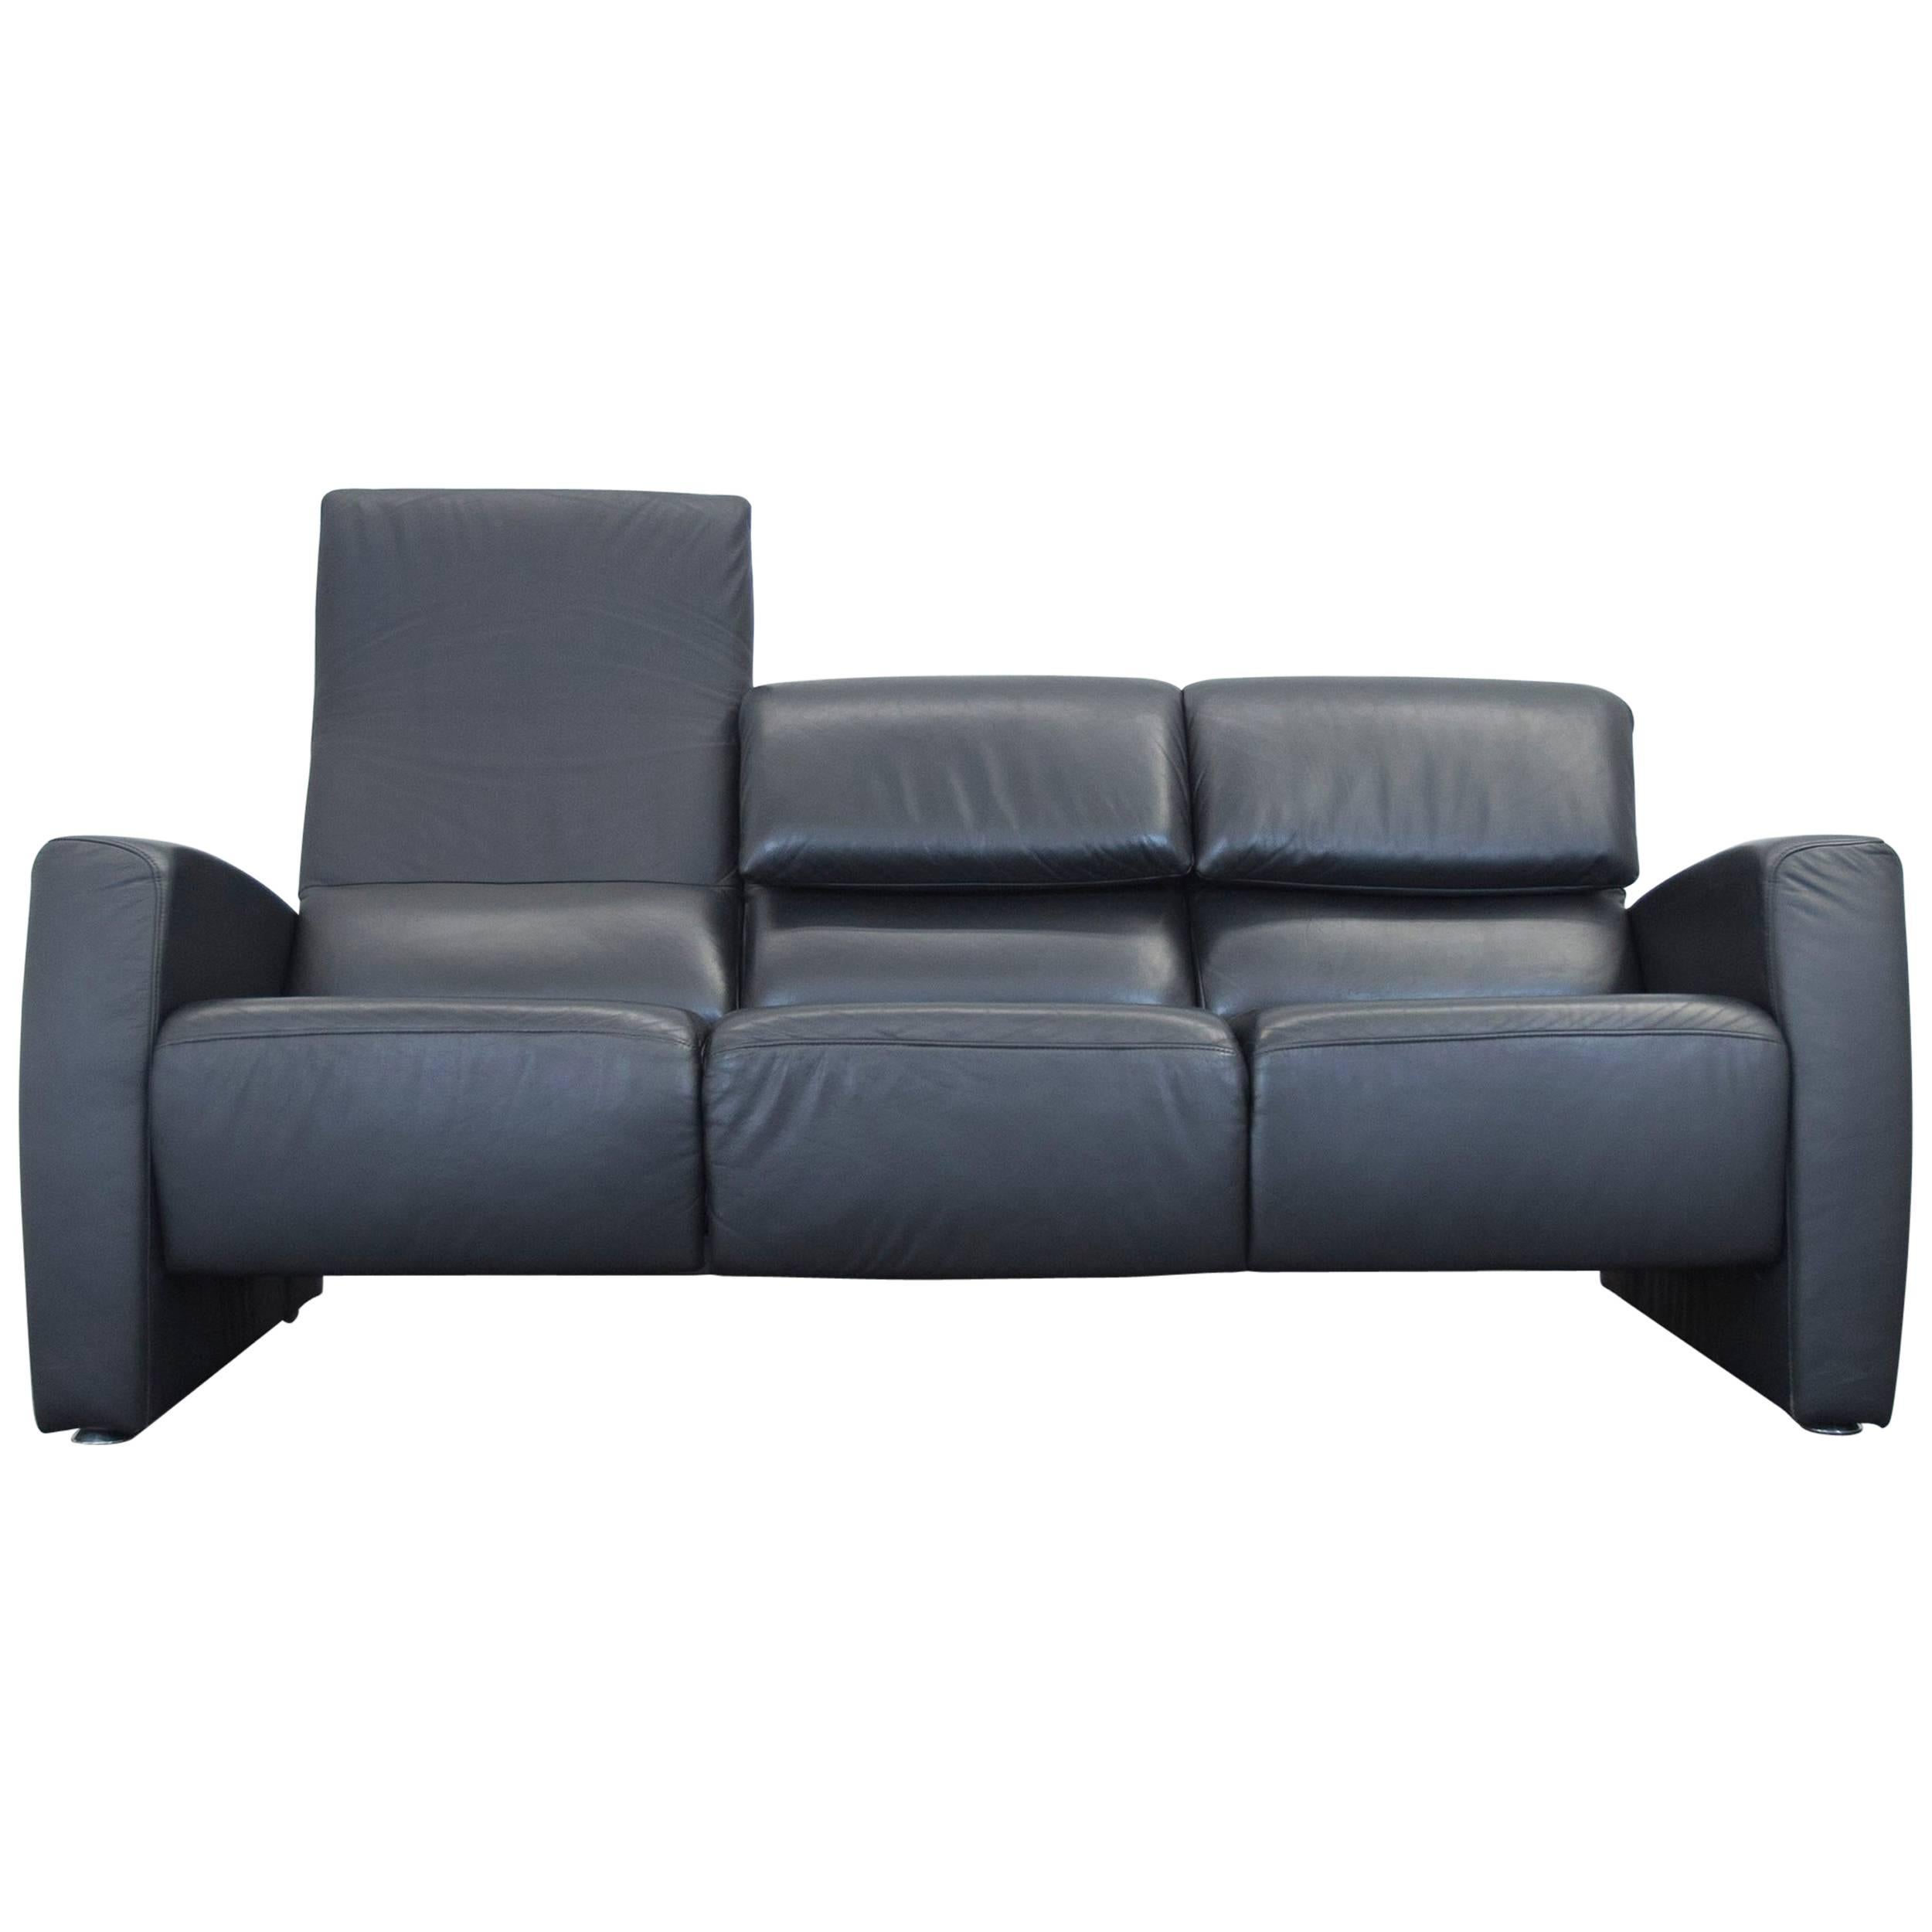 Designer Leather Sofa Black Three-Seat Couch Function Modern For Sale